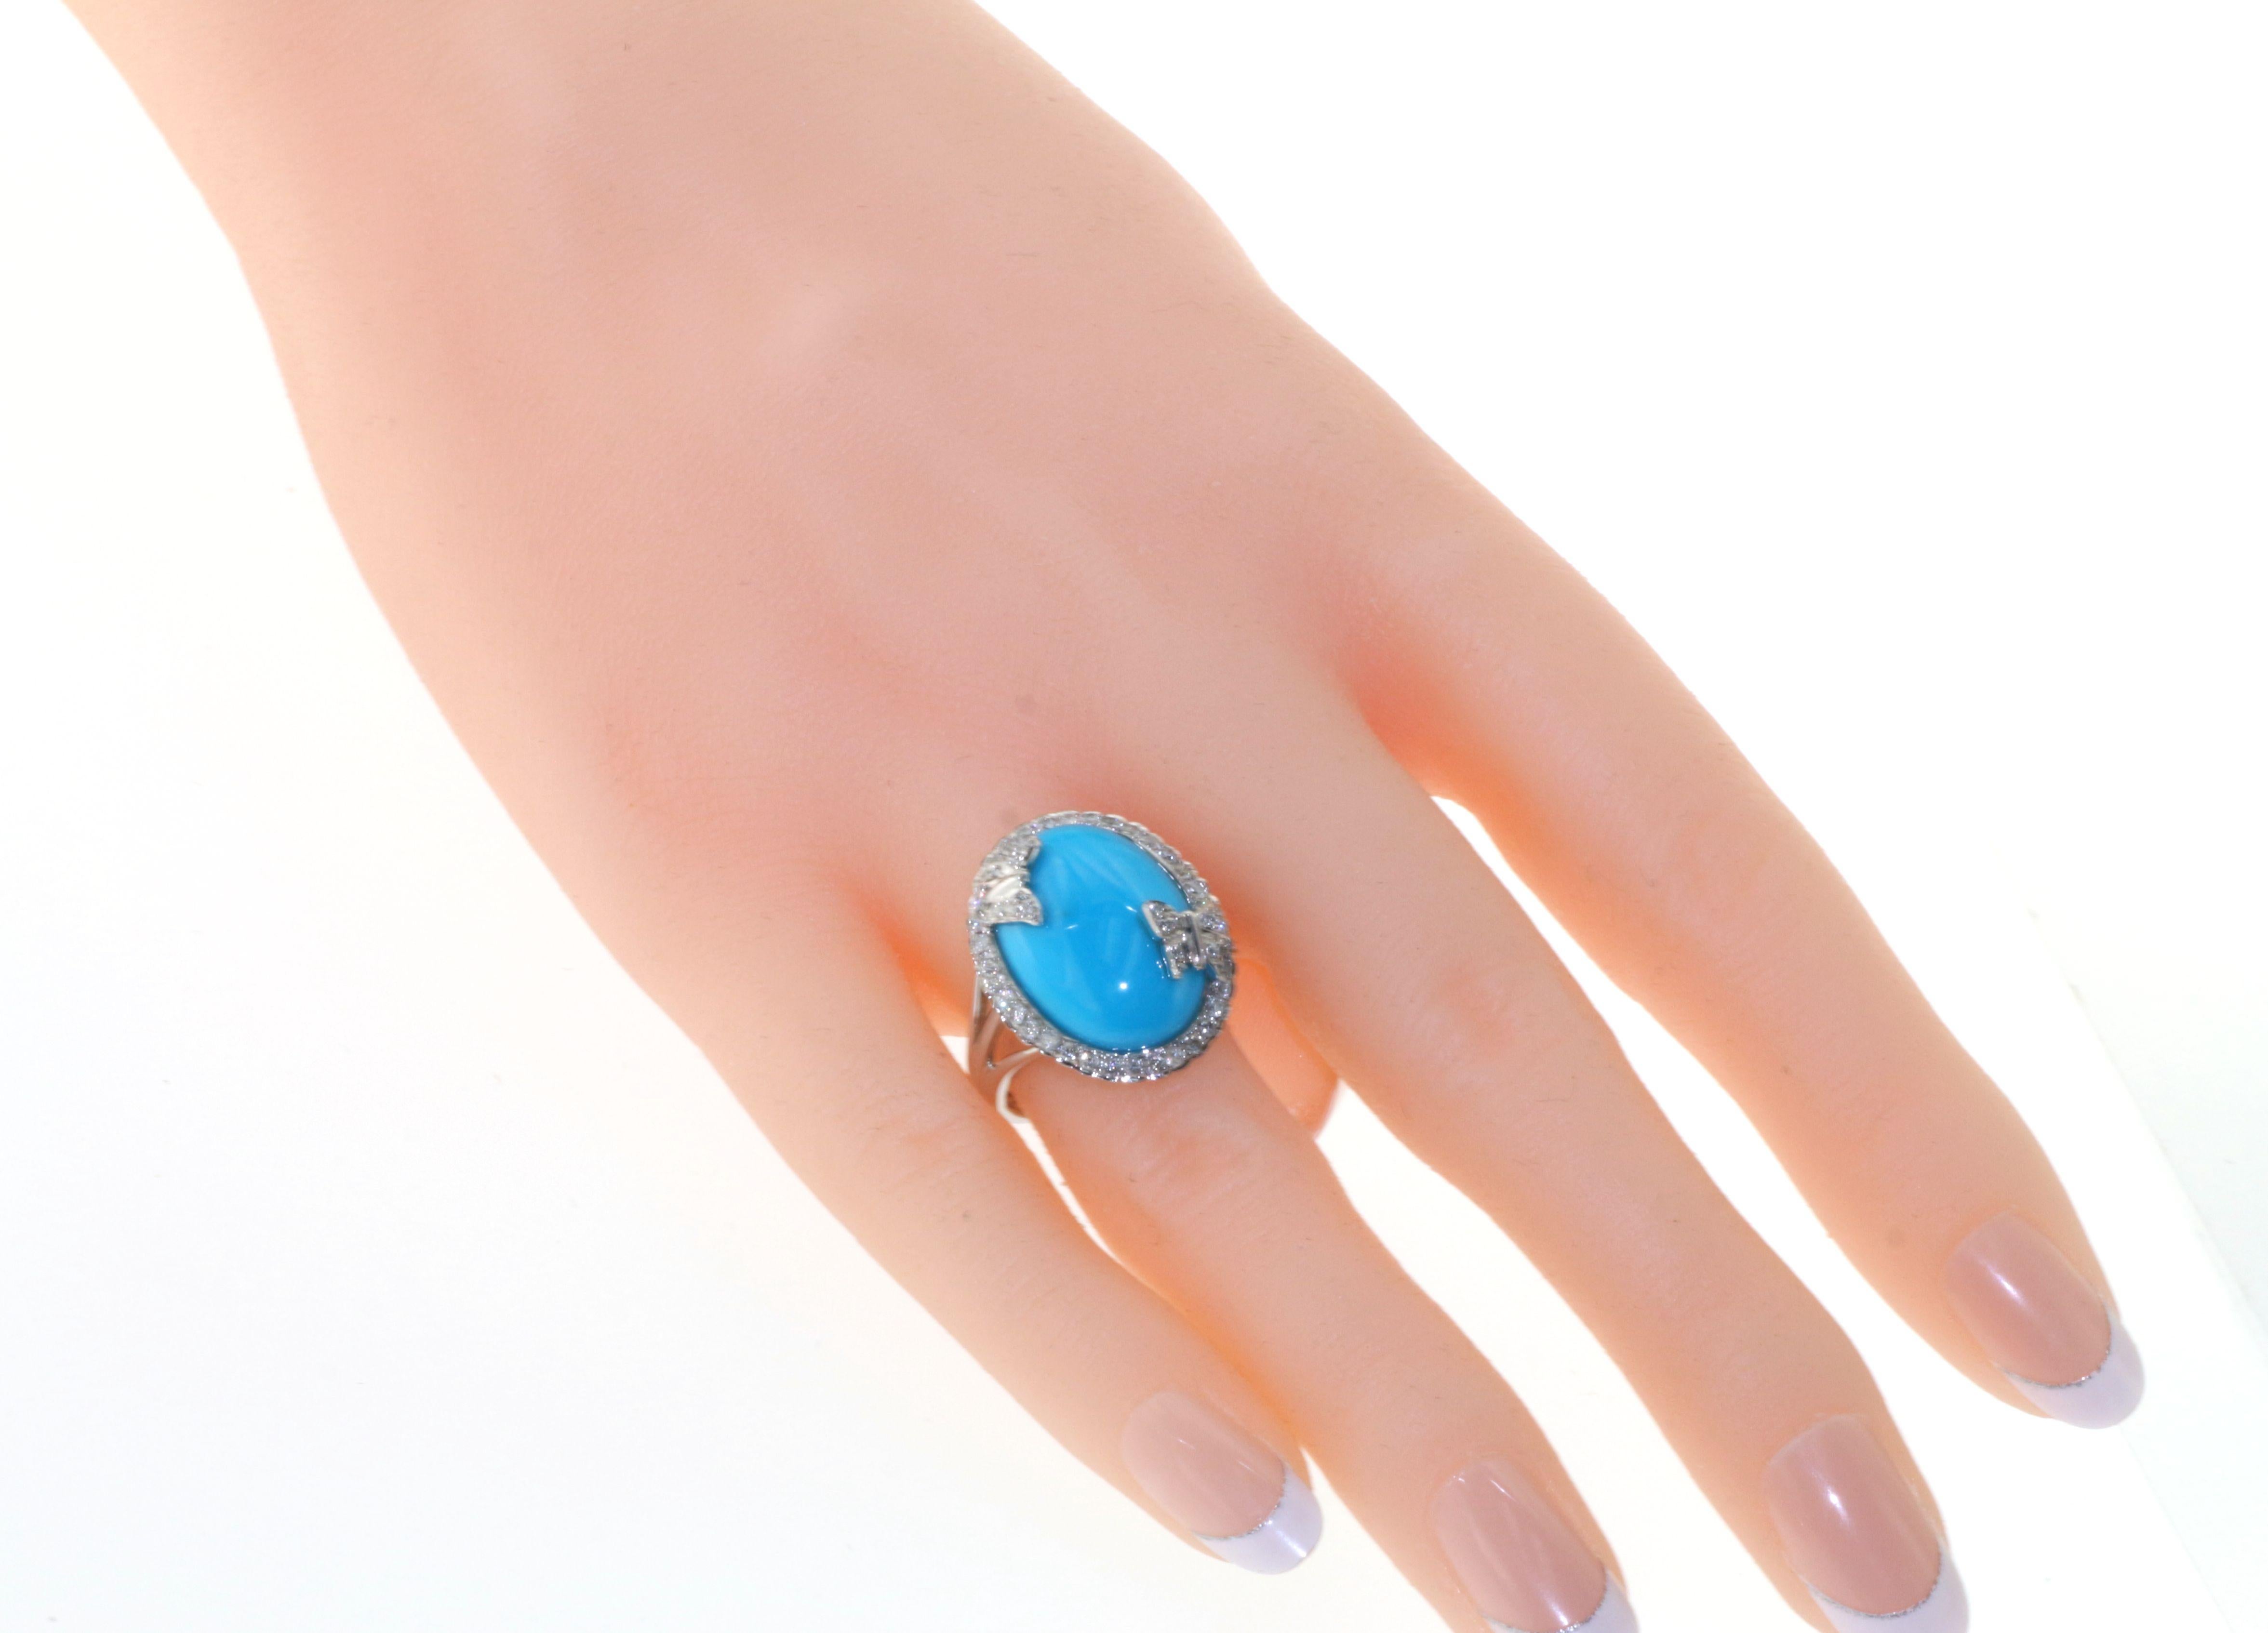 Step into a world of timeless elegance with our Sleeping Beauty turquoise ring, an embodiment of nature's purest hues and exquisite craftsmanship. At its heart lies a 9.55-carat oval cabochon turquoise, meticulously sourced from the renowned